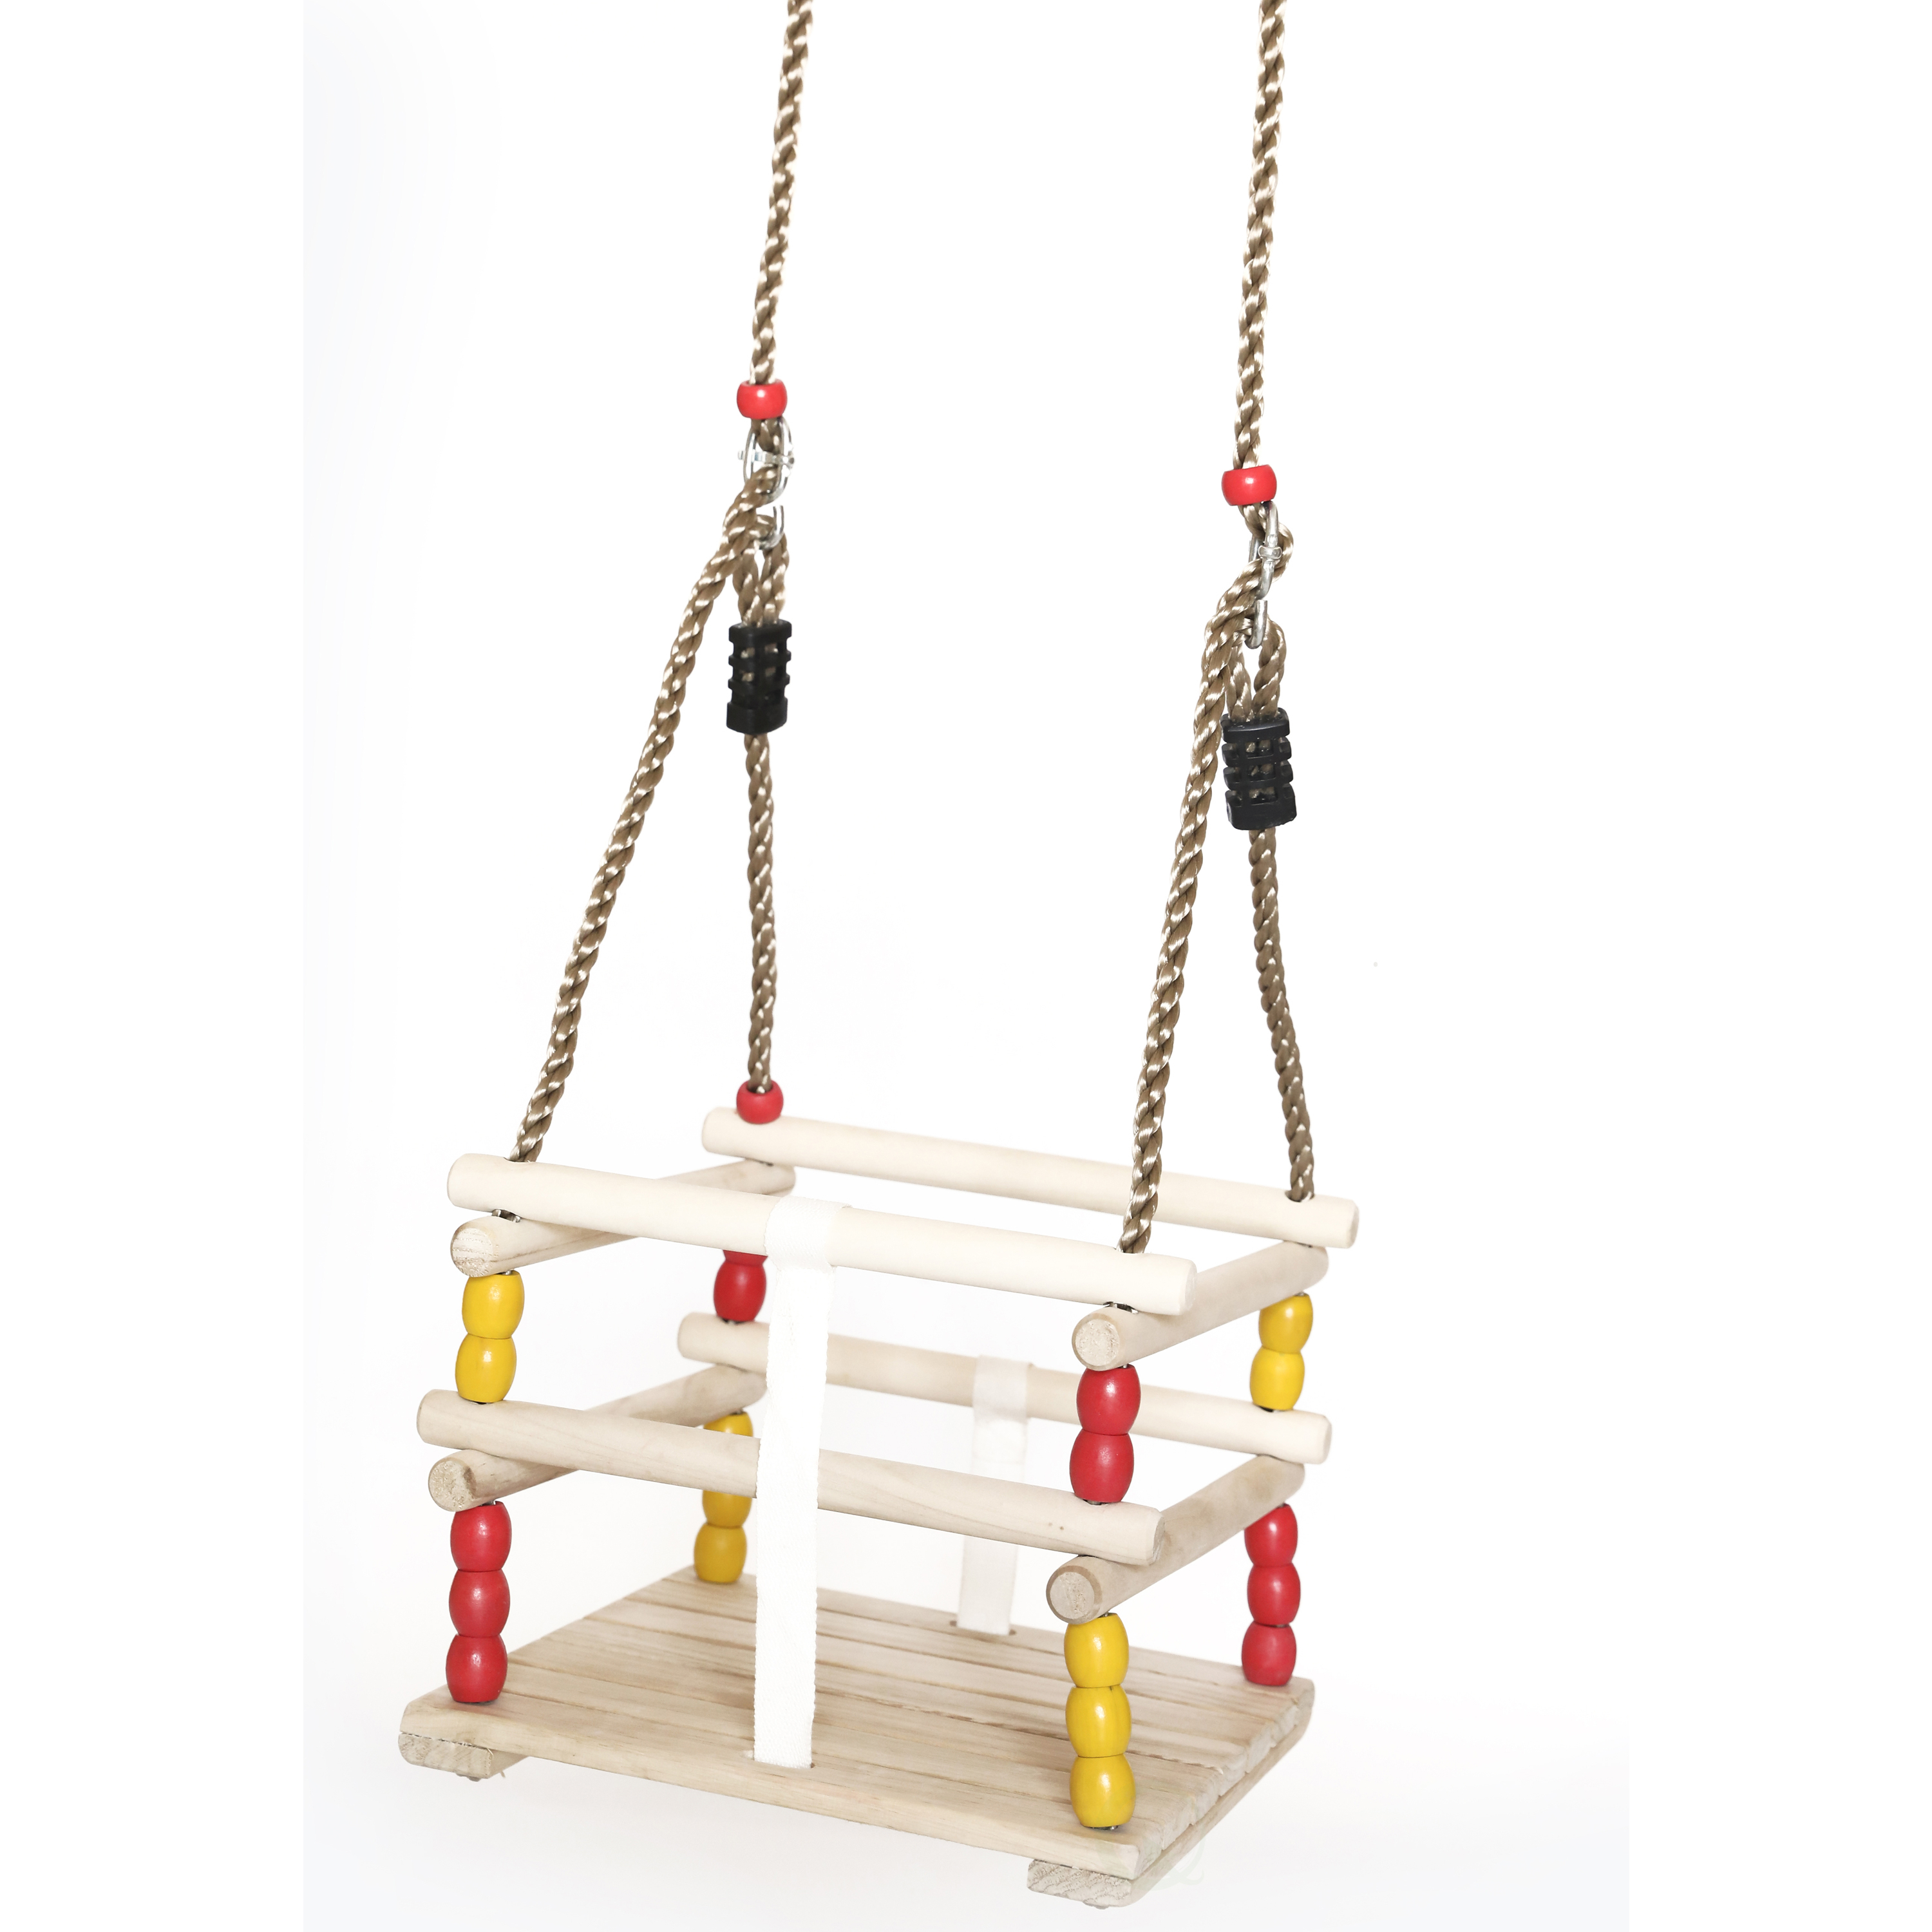 Wooden Baby Swing With Hanging Ropes, For Babies And Toddlers